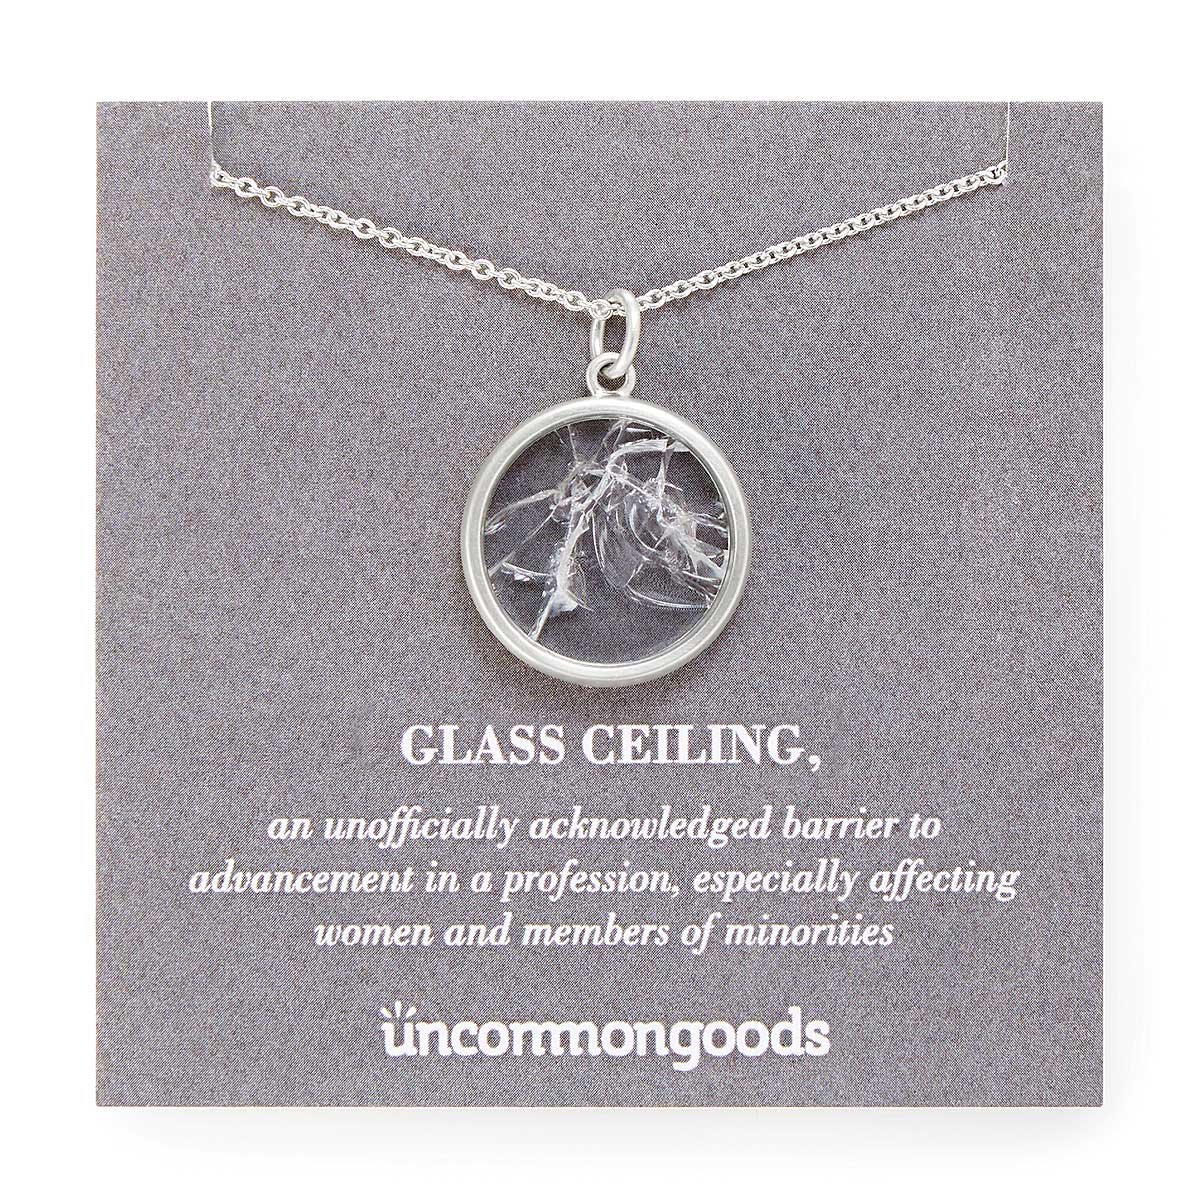 Shattered Glass Ceiling Necklace | UncommonGoods